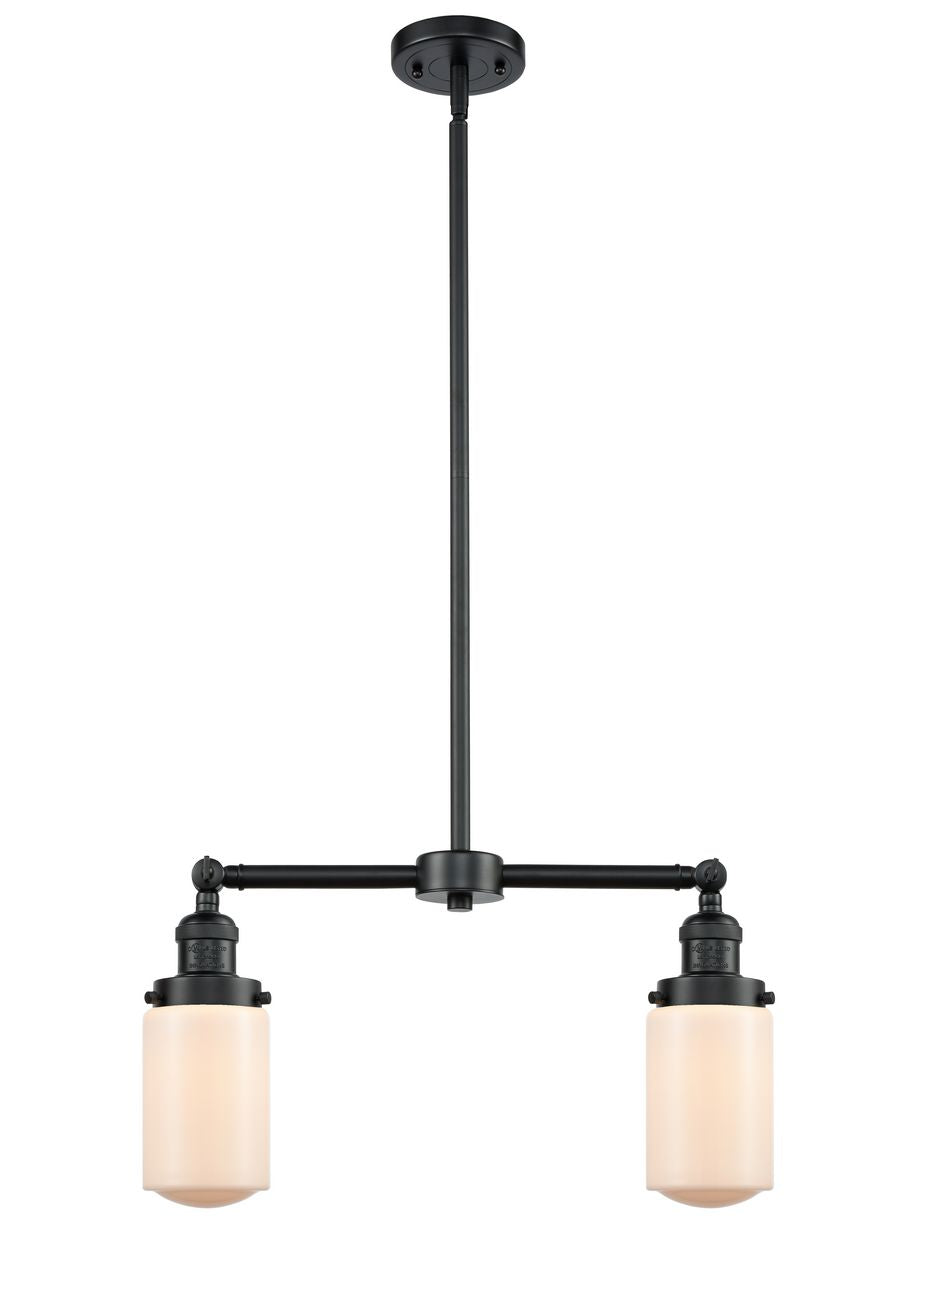 209-OB-G311 2-Light 21" Oil Rubbed Bronze Island Light - Matte White Cased Dover Glass - LED Bulb - Dimmensions: 21 x 4.5 x 10.75<br>Minimum Height : 21.625<br>Maximum Height : 44.625 - Sloped Ceiling Compatible: Yes